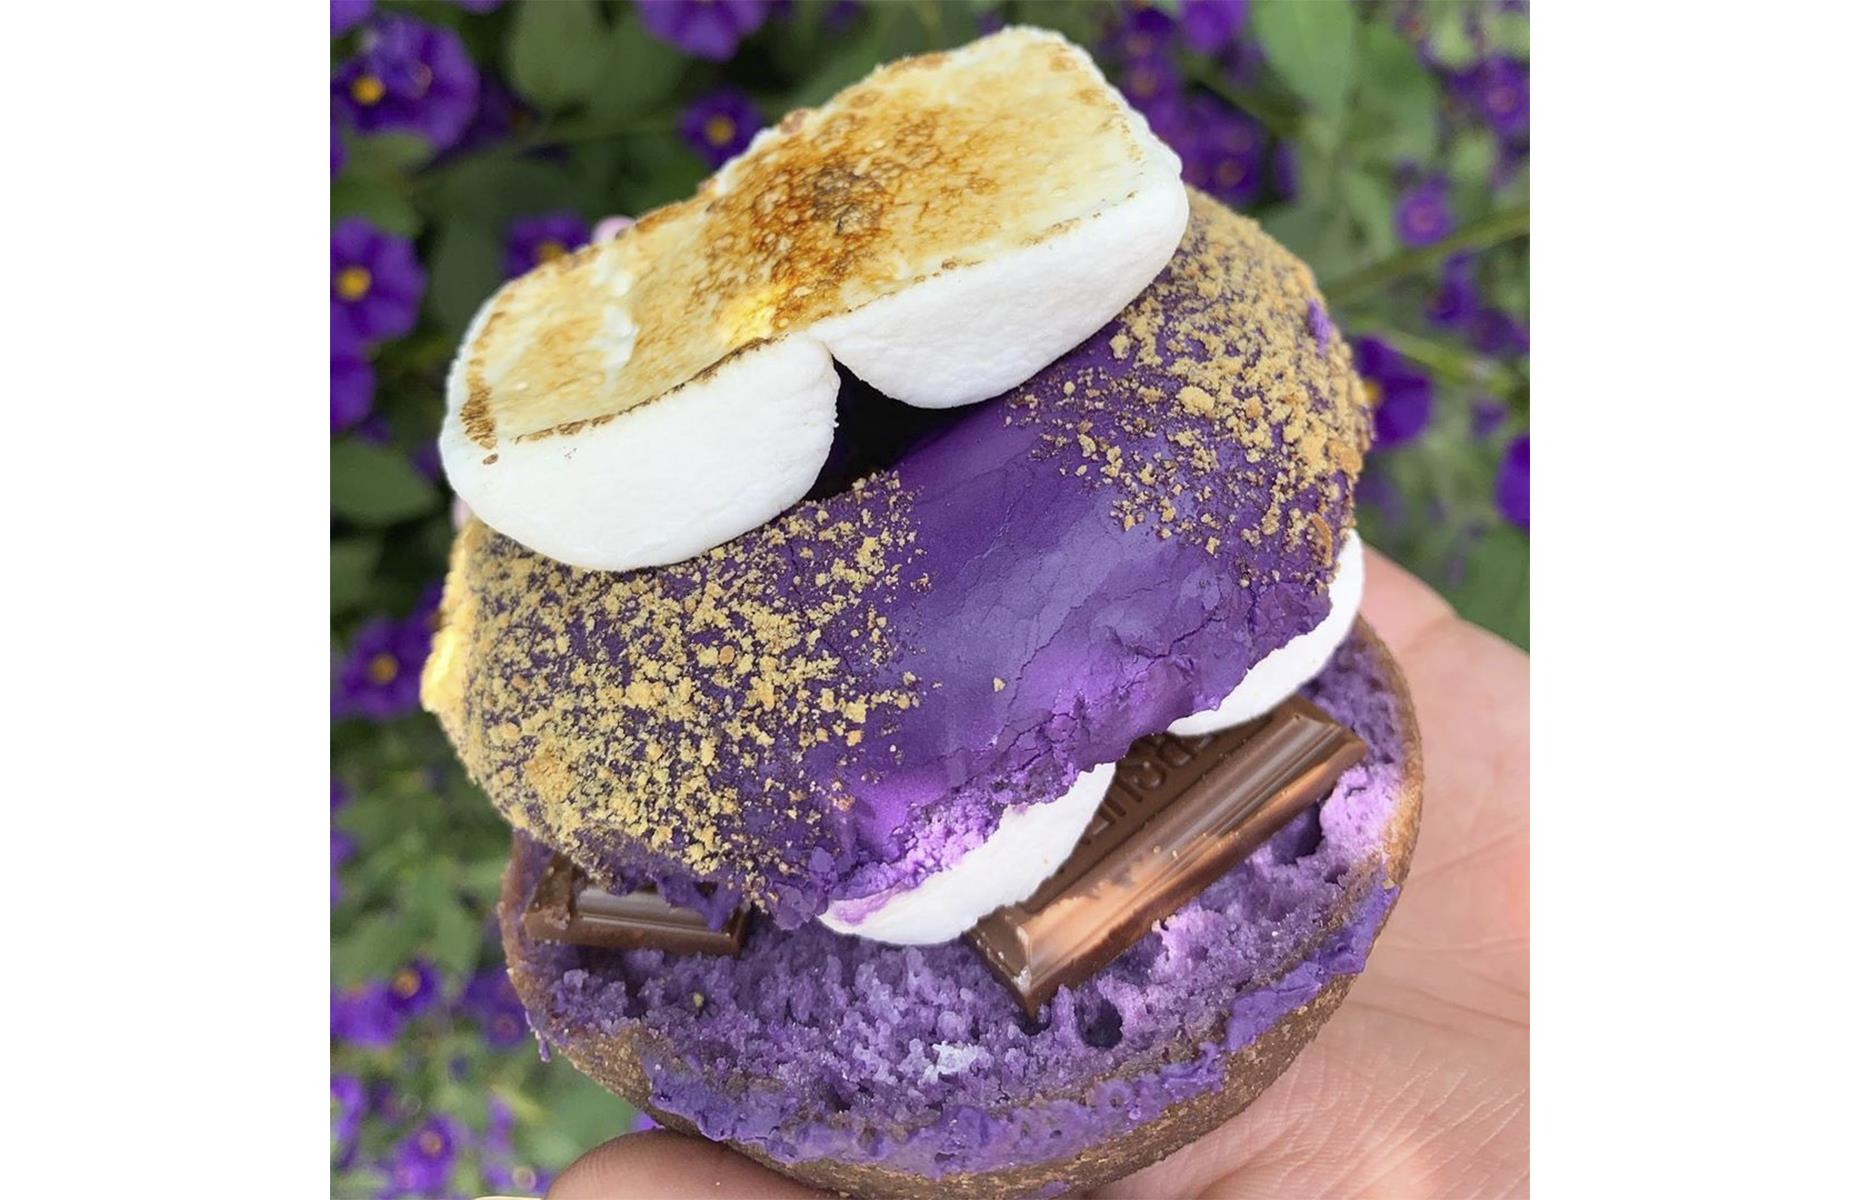 <p>The Ube S’mores from <a href="https://www.instagram.com/coloradodonuts/">Colorado Donuts</a>, released as a limited edition, owed its distinctive purple hue to the ube or purple yam. The tuber gave the donut a nutty, vanilla flavor as well as keeping the texture moist. It was served sliced in half and stuffed with Hershey’s chocolate and toasted marshmallows in the style of s'mores. Another toasted marshmallow and smattering of crushed Graham crackers completed the treat.</p>  <p><strong><a href="https://www.lovefood.com/galleries/84980/classic-american-restaurant-dishes-you-can-make-at-home">Try these classic American restaurant dishes you can make at home</a></strong></p>